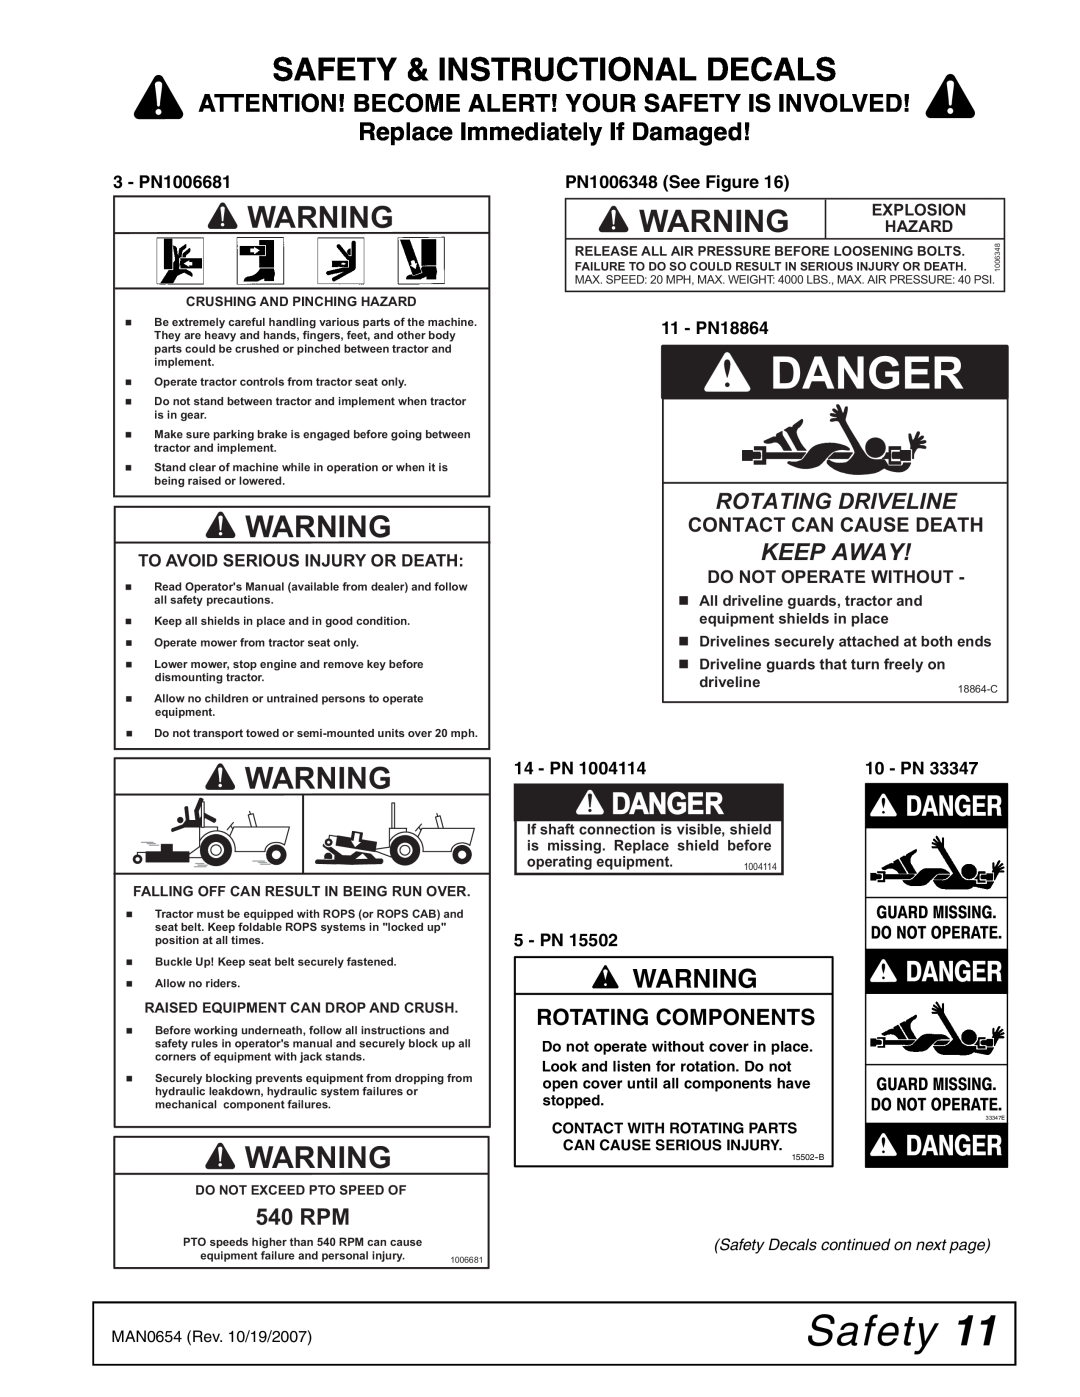 Woods Equipment BB720X Danger, 33347E, Safety & Instructional Decals, Attention! Become Alert! Your Safety Is Involved 